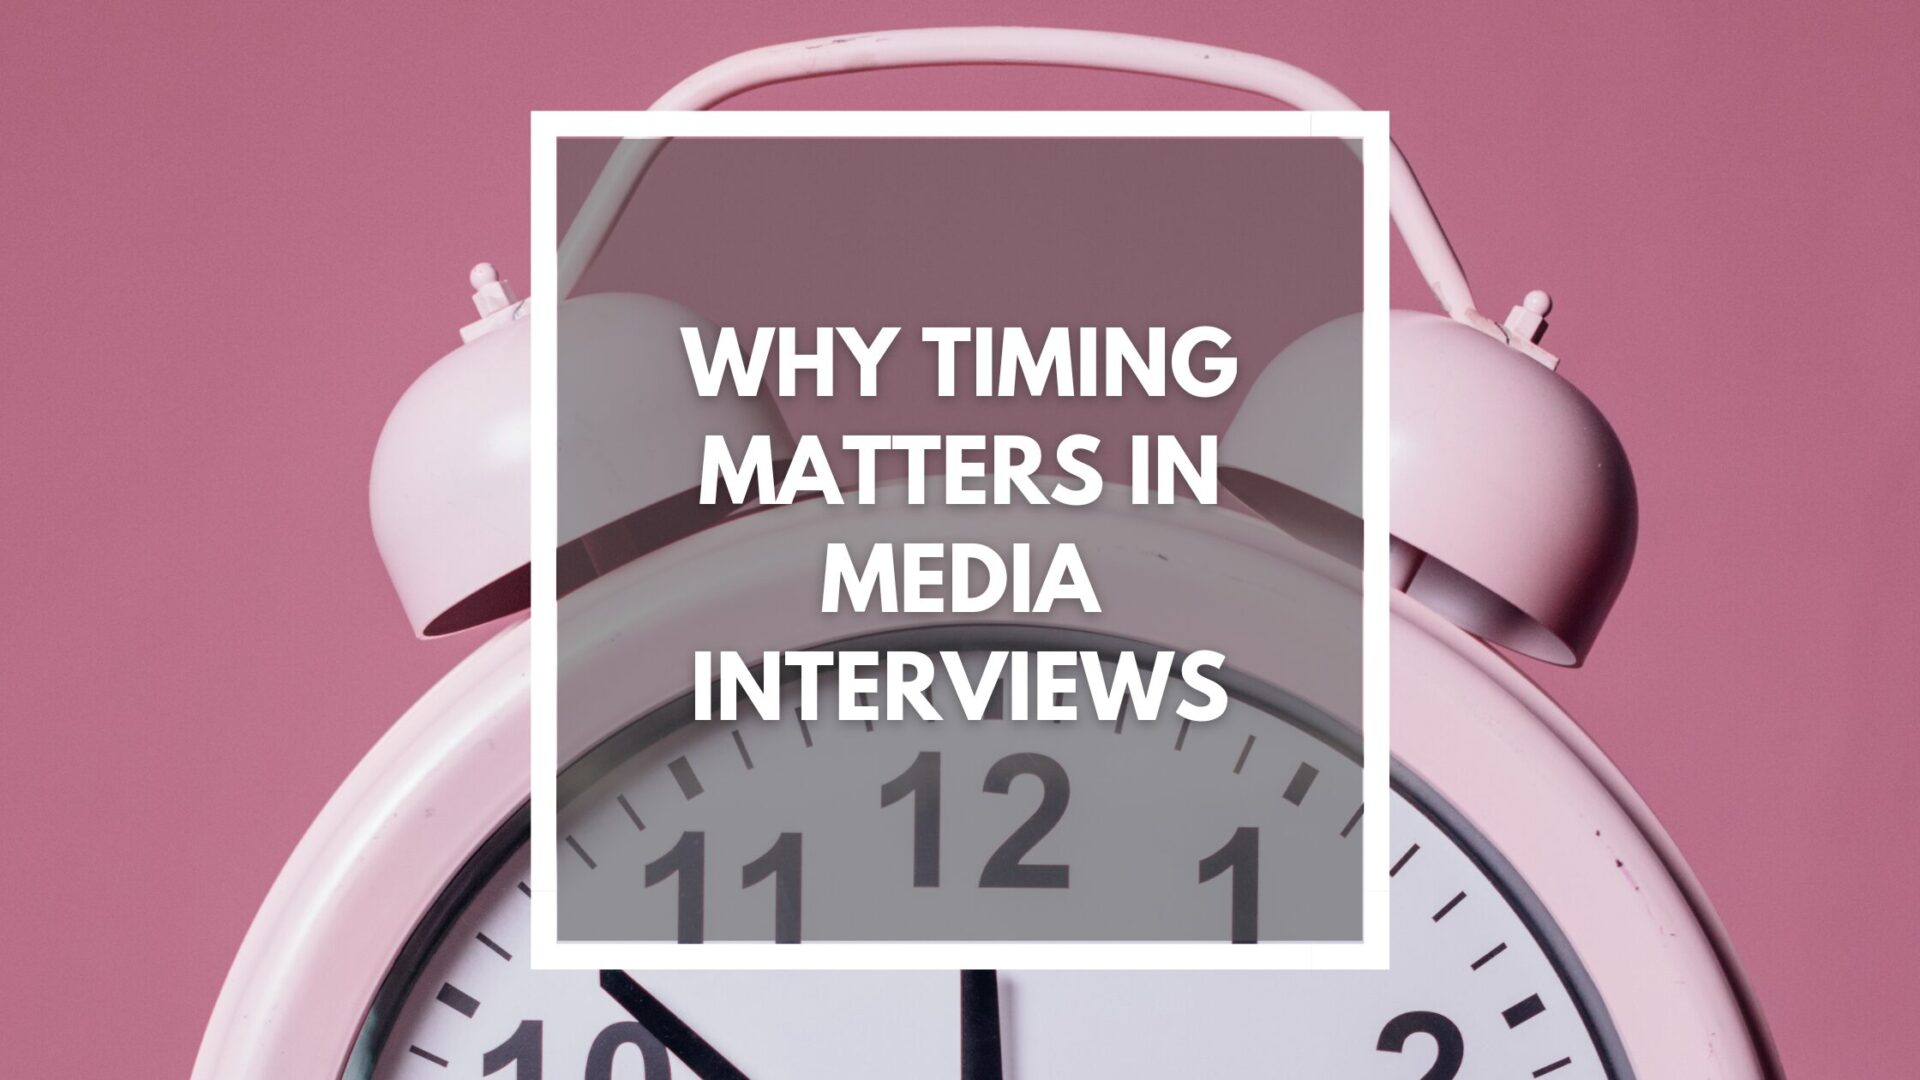 You are currently viewing Why timing matters in media interviews